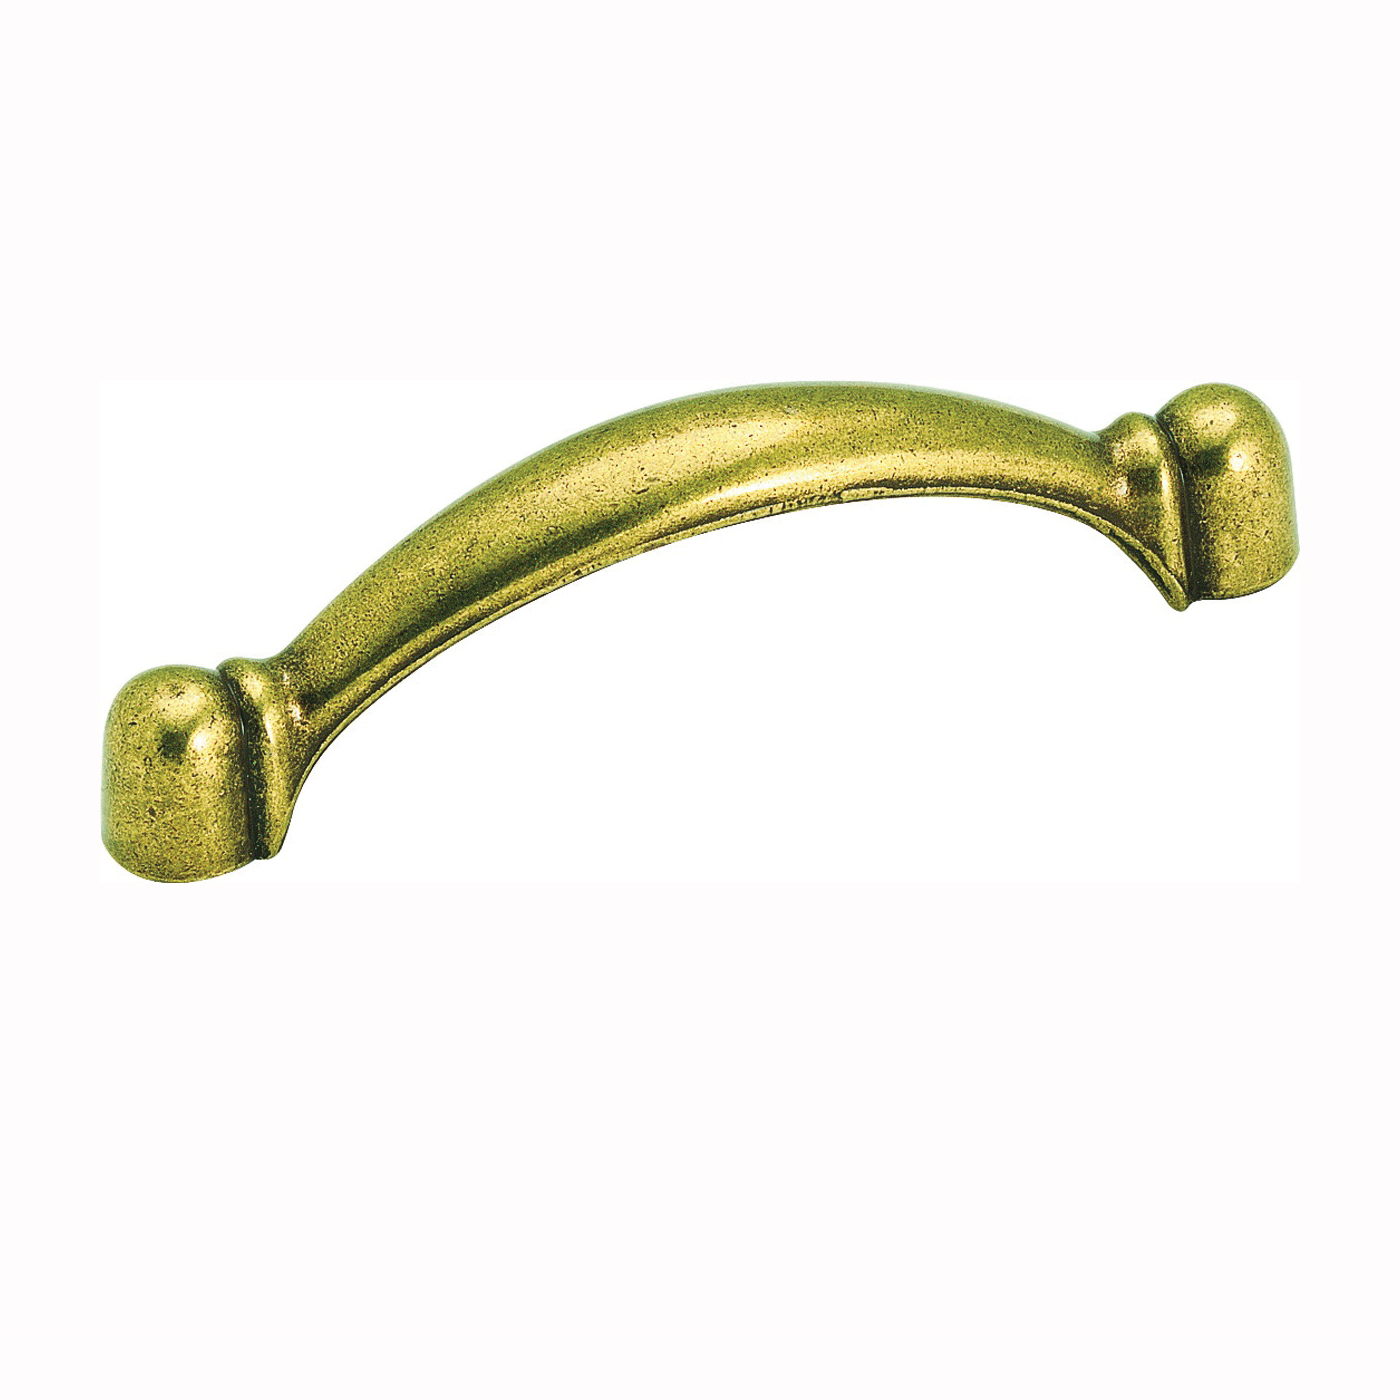 Amerock BP3441BB Cabinet Pull, 3-7/16 in L Handle, 1-1/8 in H Handle, 15/16 in Projection, Zinc, Burnished Brass